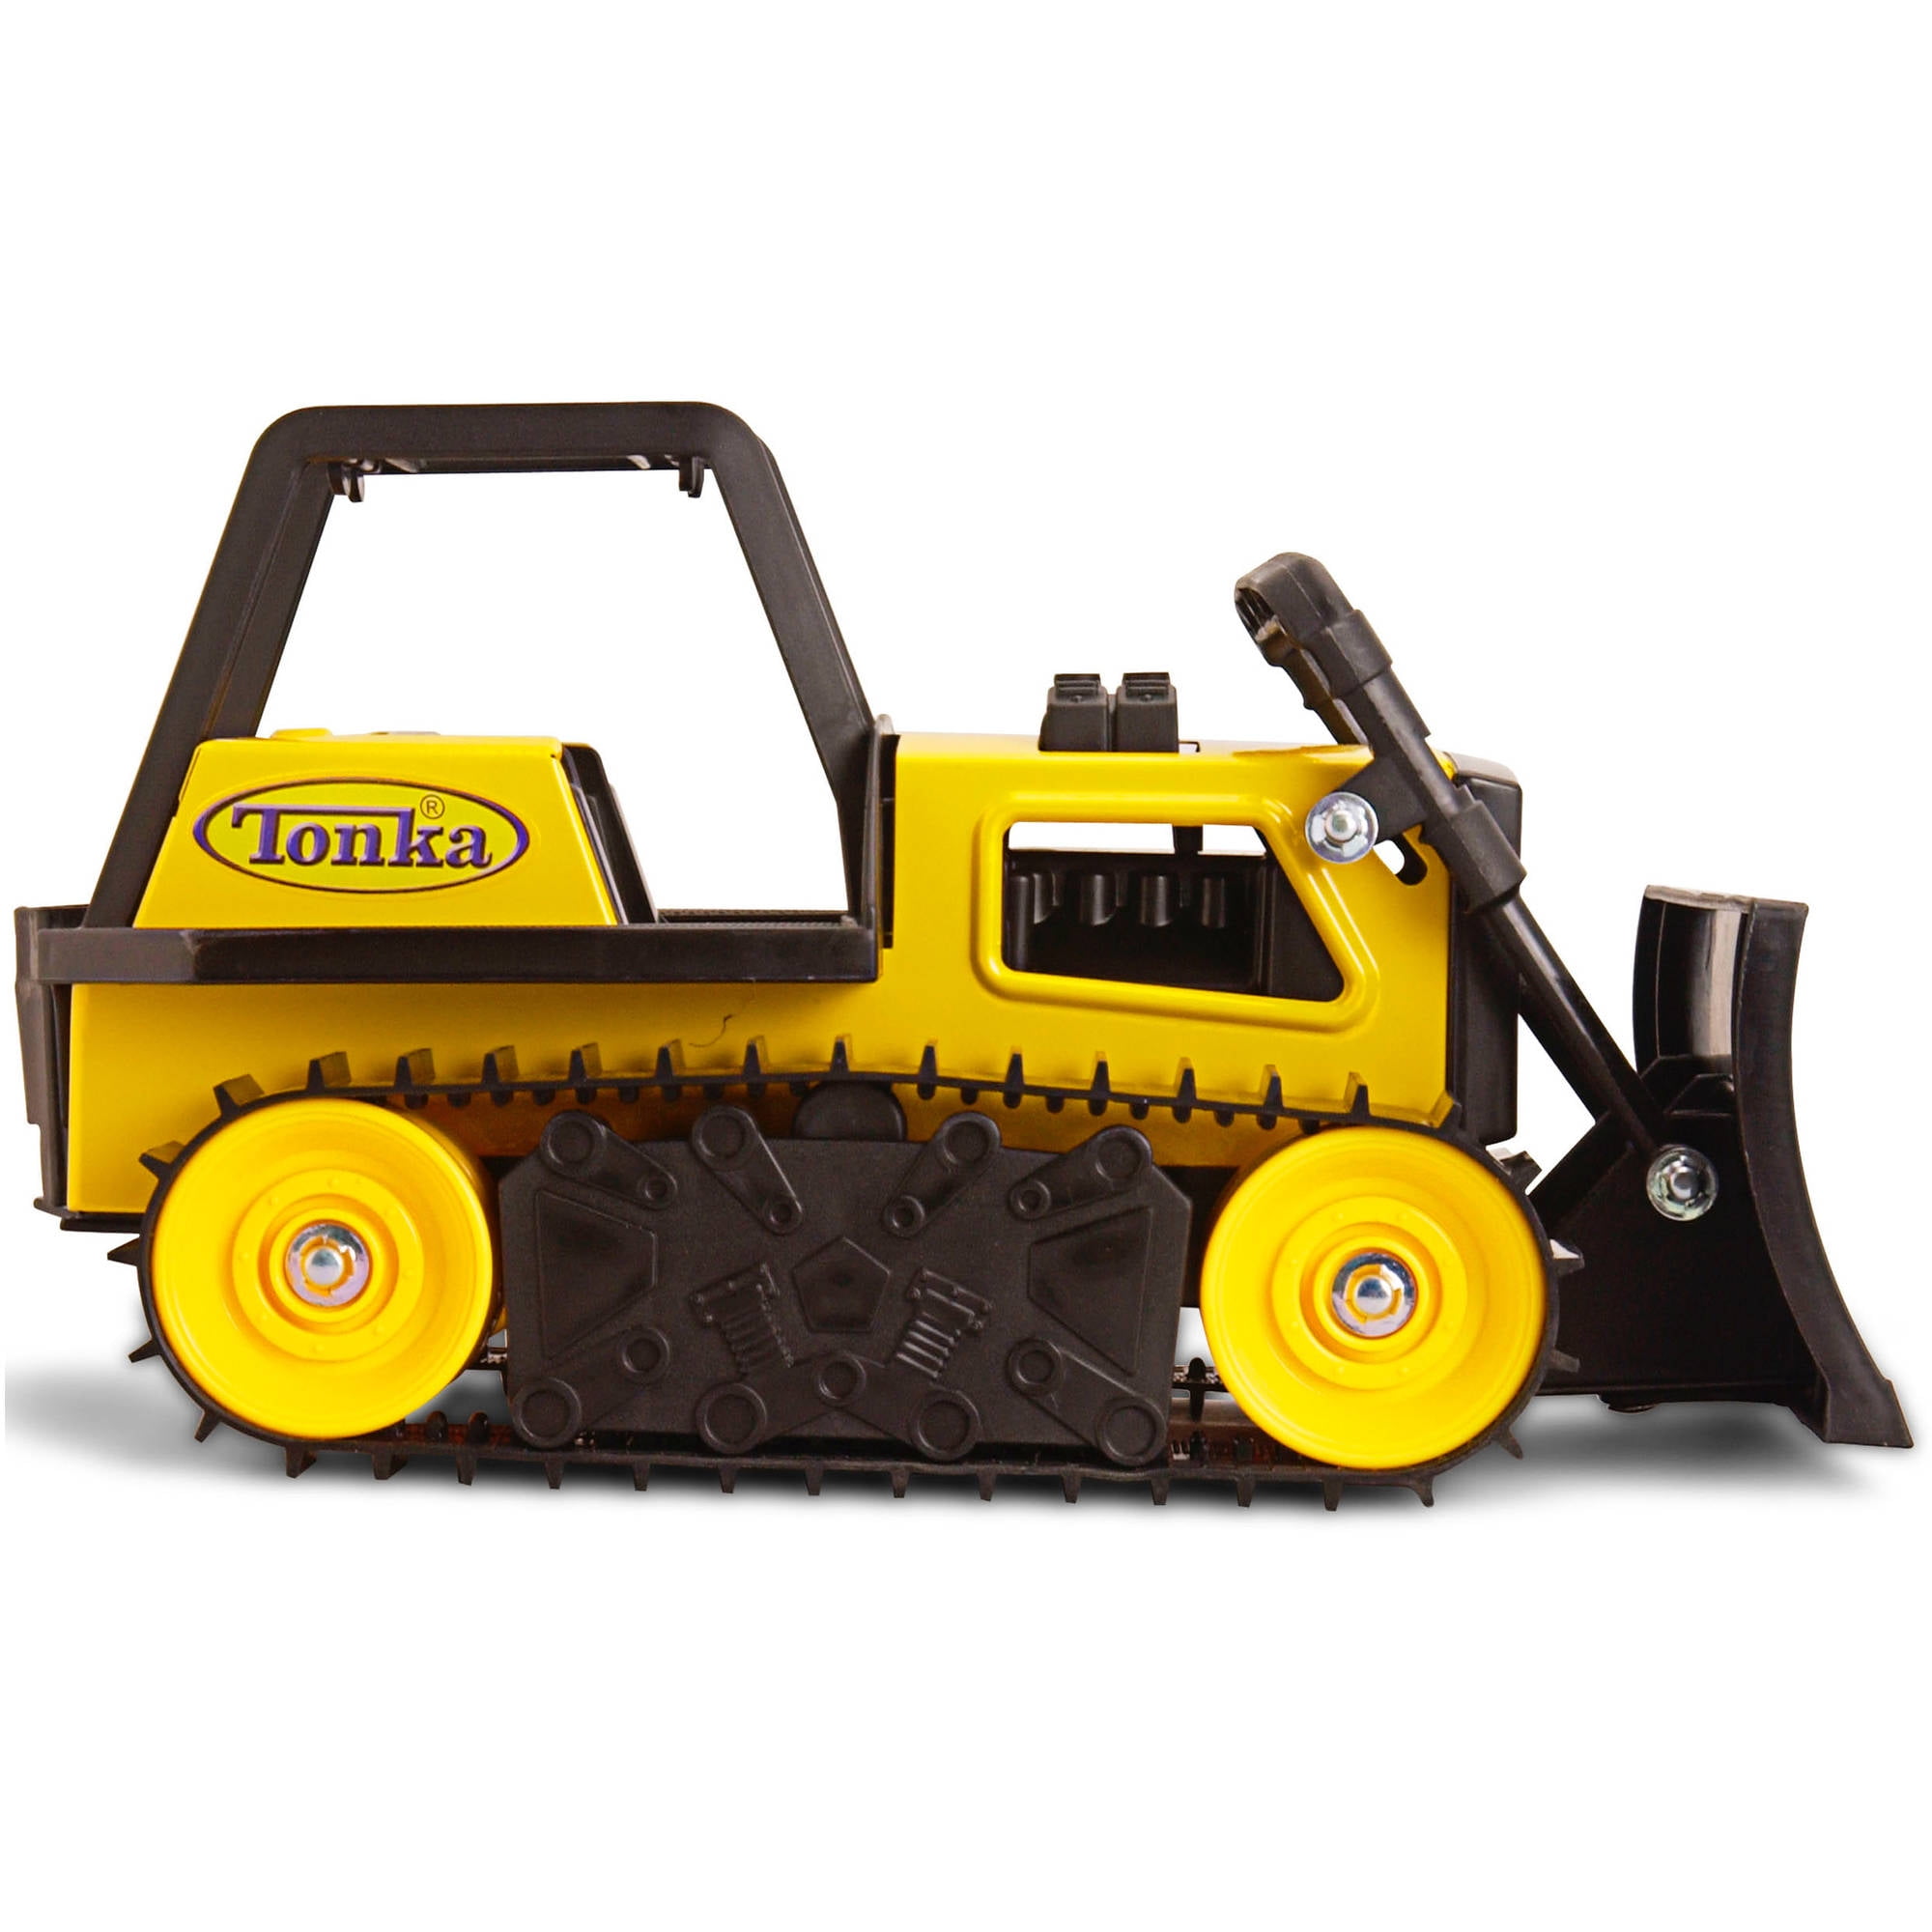 Tonka Classic Steel Toughest Road Grader Construction Toy 